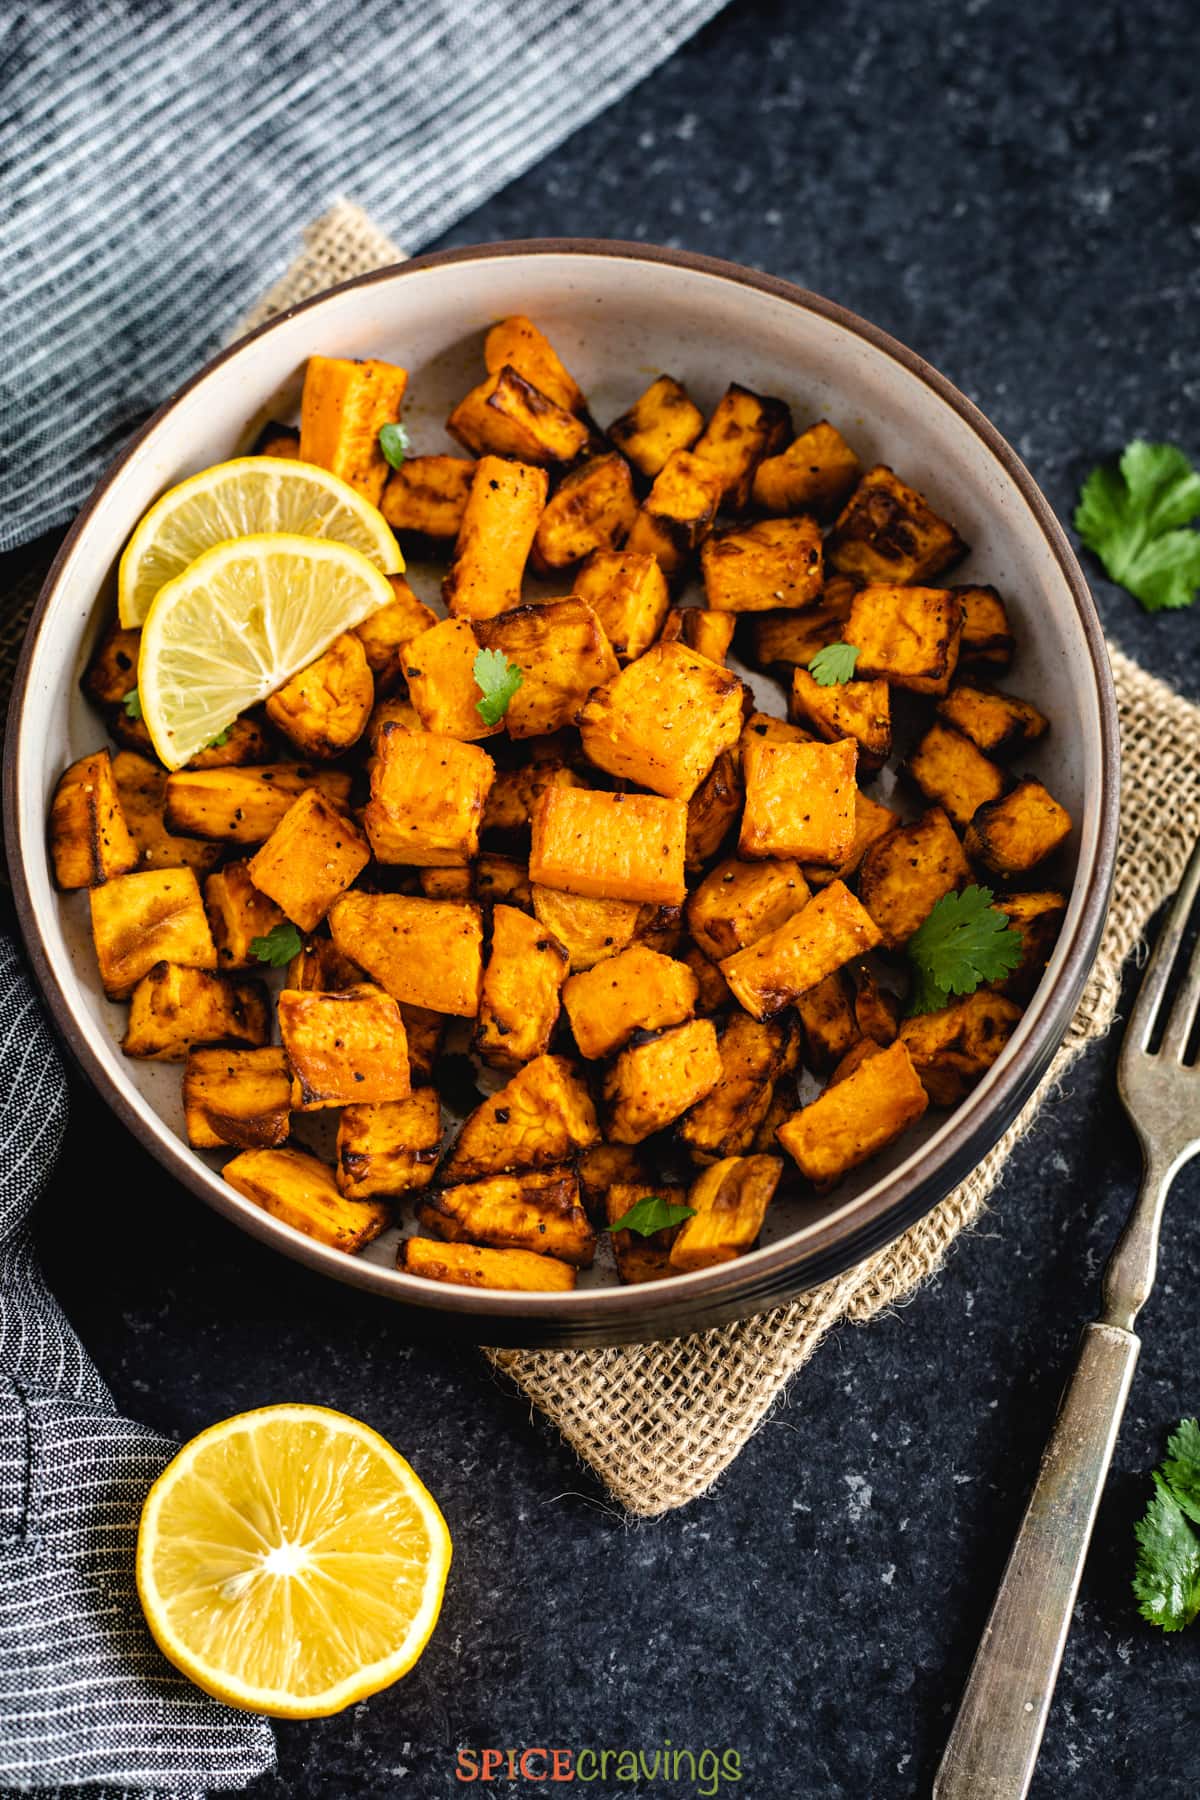 Cubes of roasted sweet potatoes in a bowl with lemon wedges